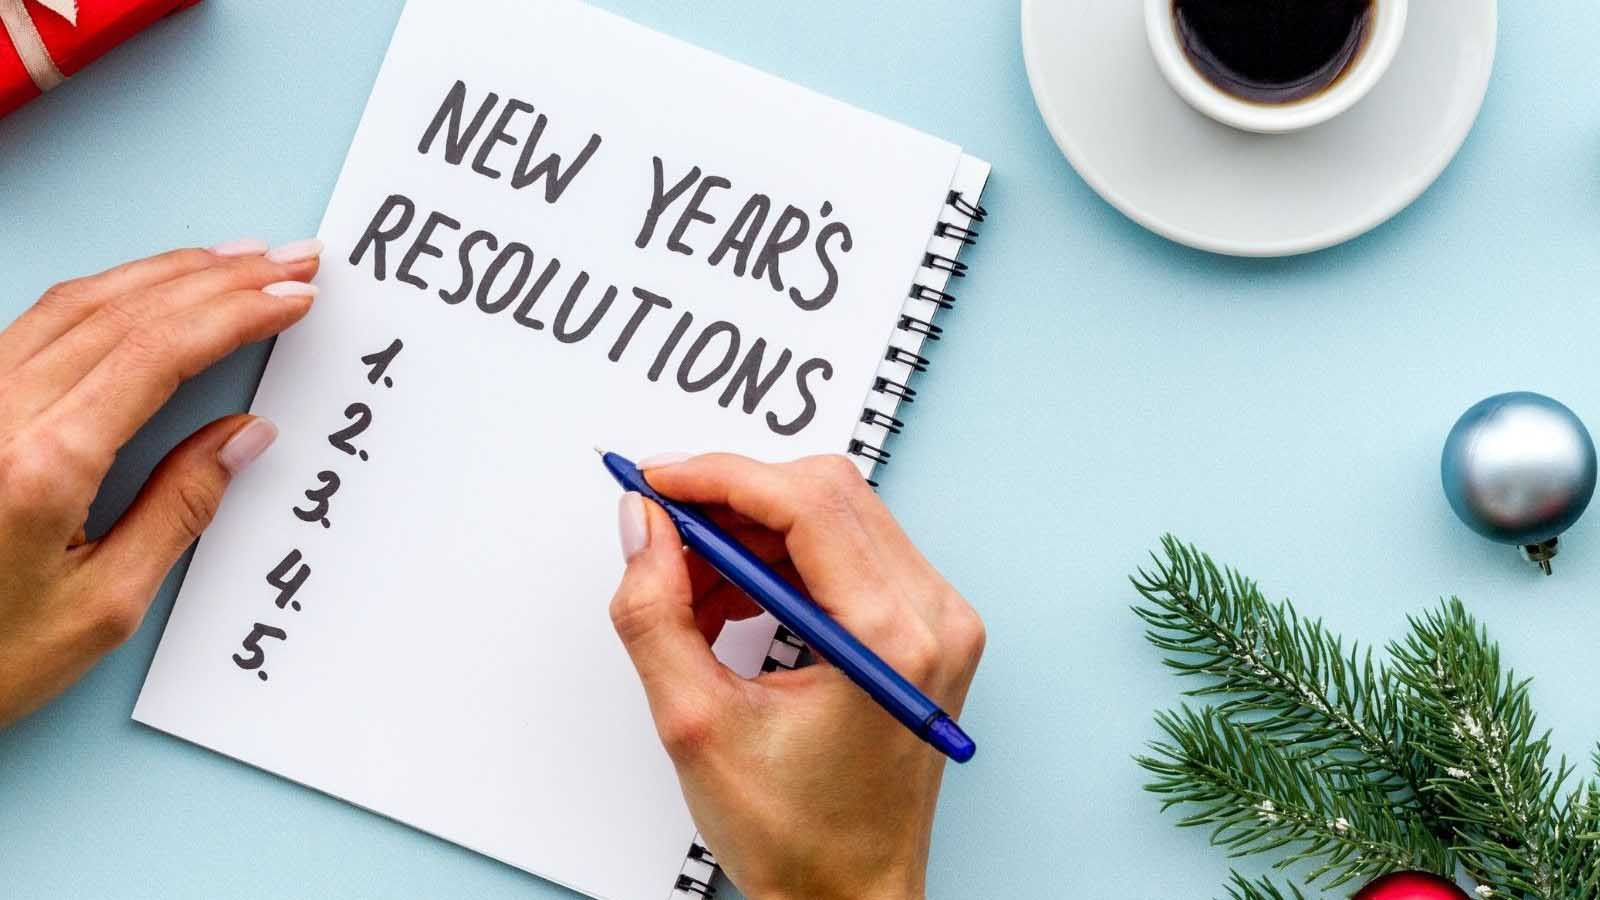 Tips to keep the new year's resolution.